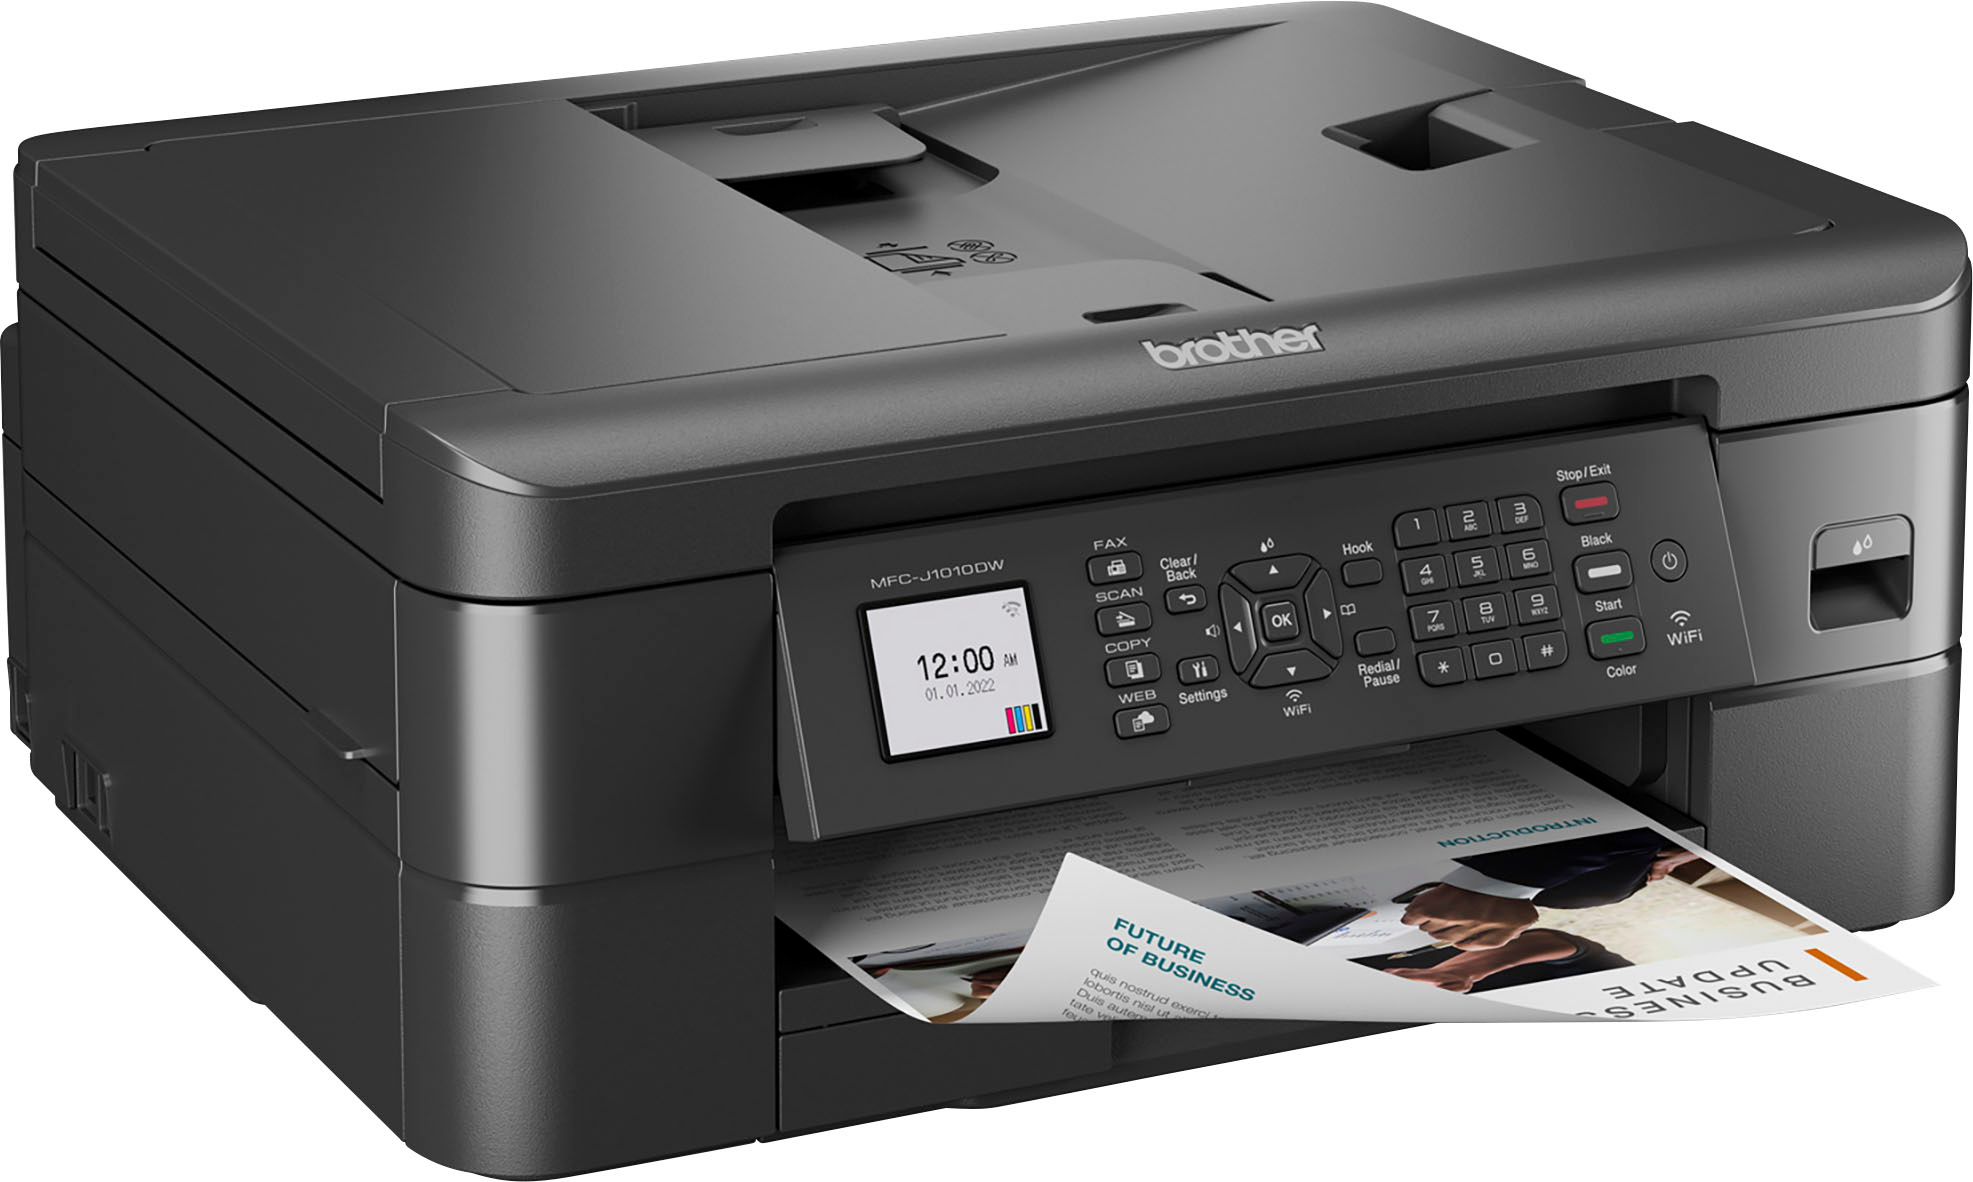  Brother MFC-J1010DW Wireless Color Inkjet All-in-One